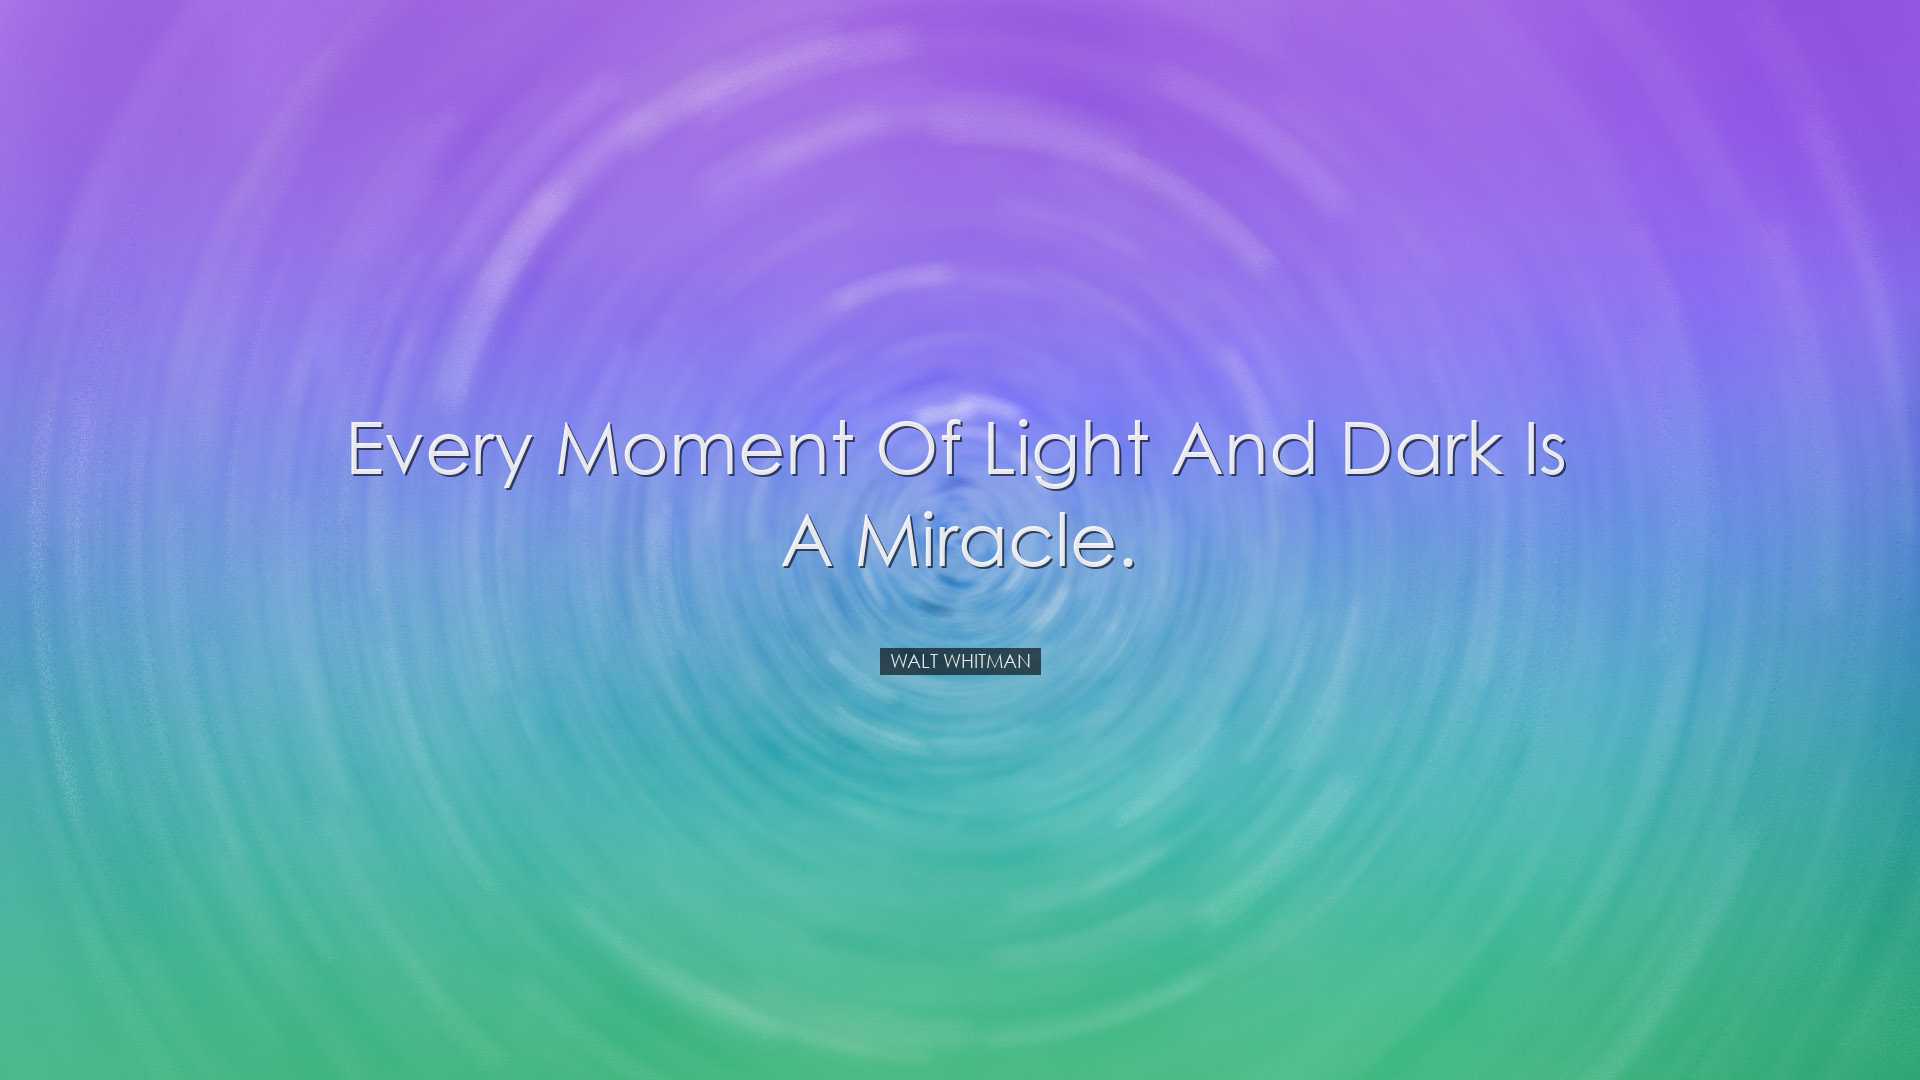 Every moment of light and dark is a miracle. - Walt Whitman